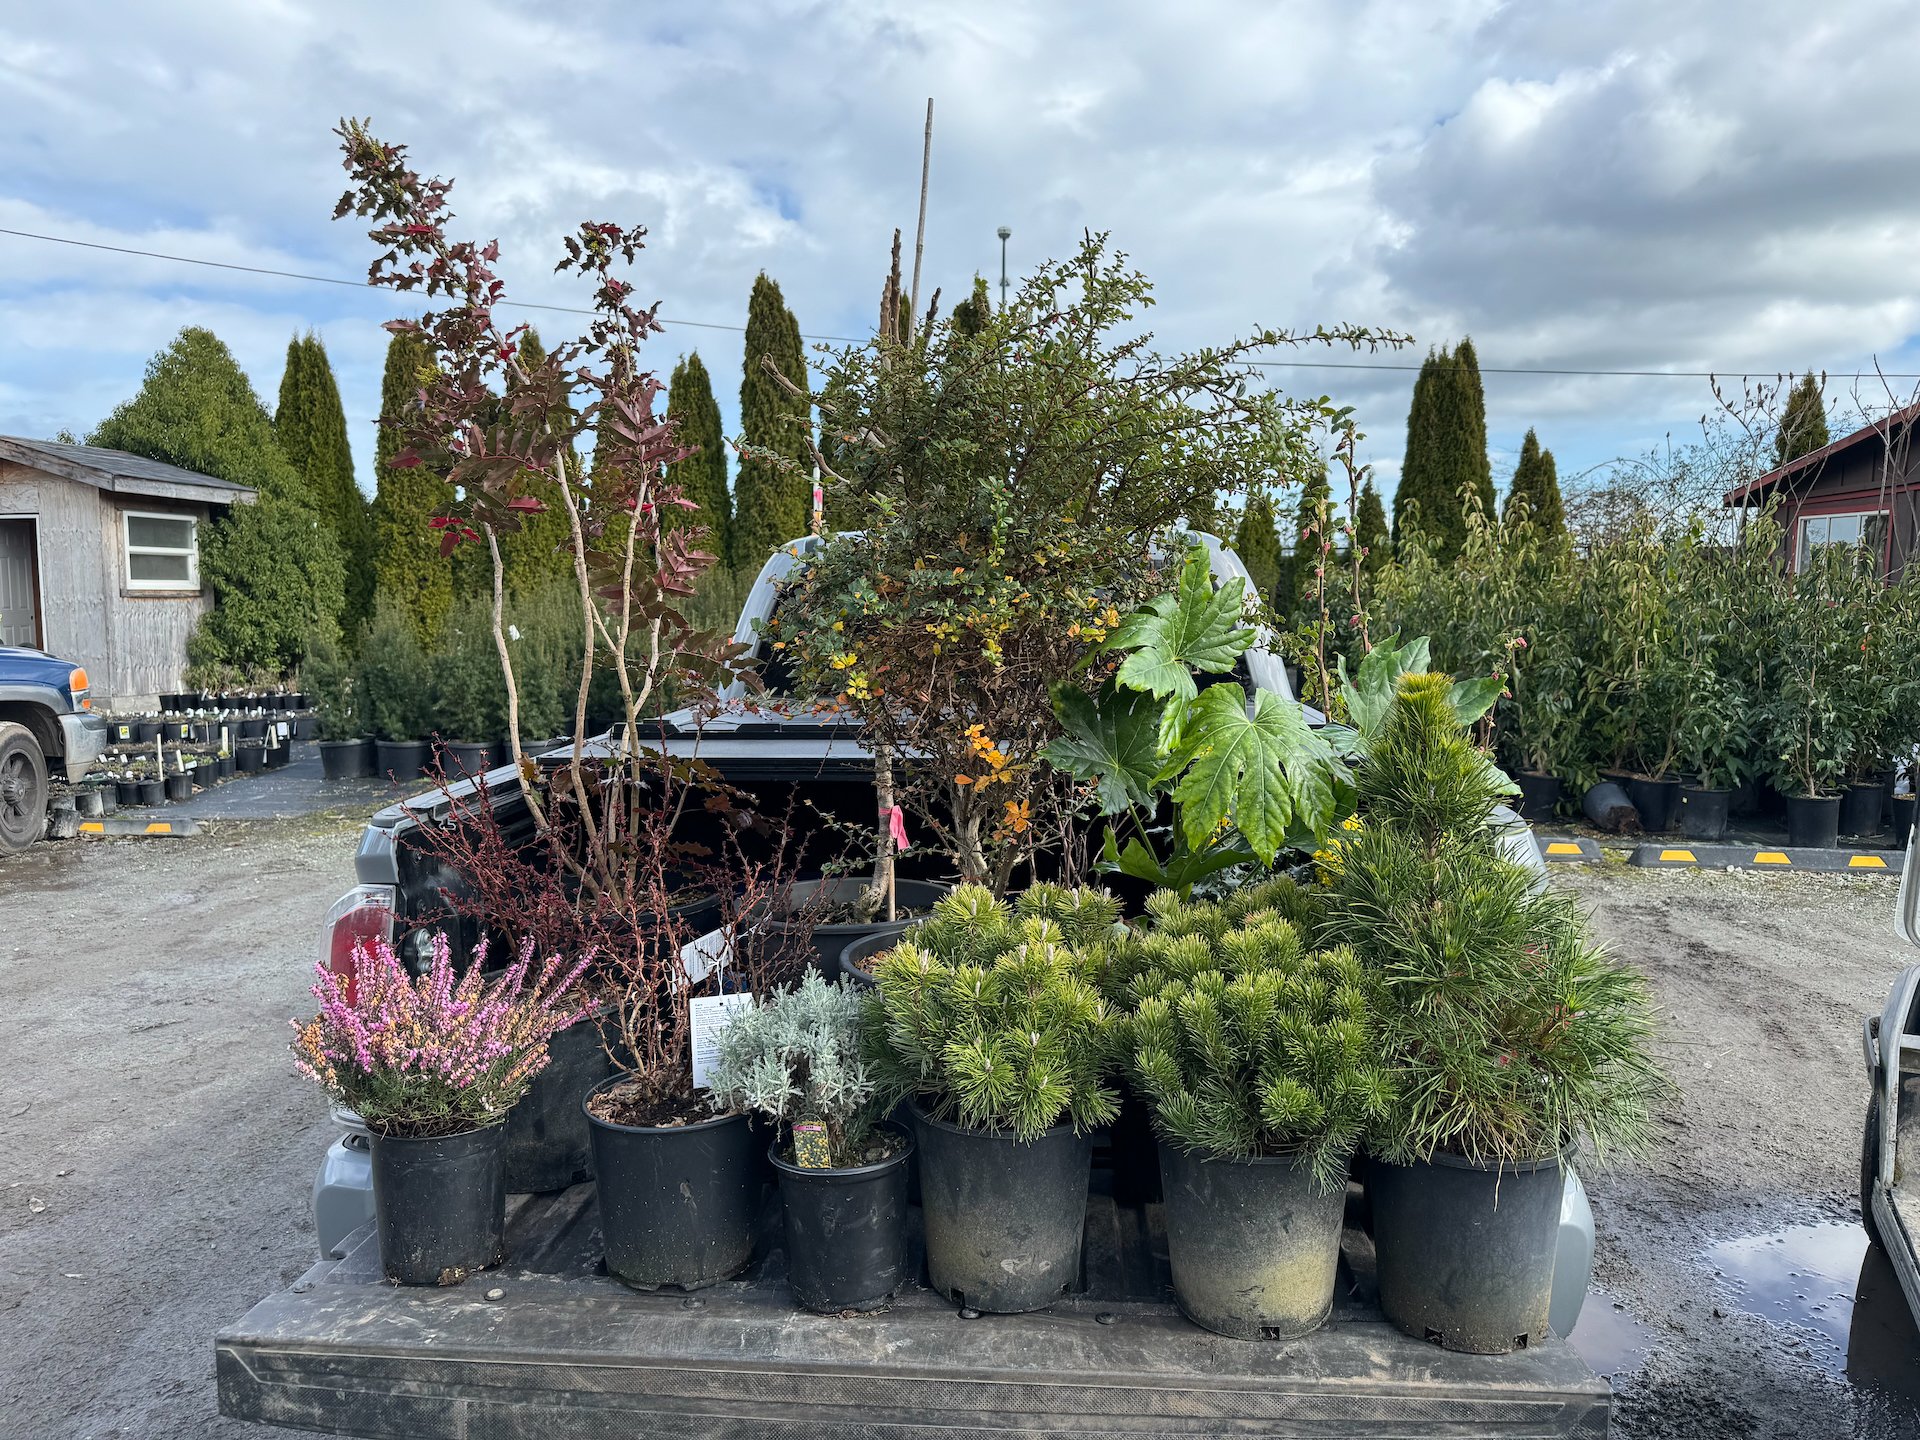  We spent a good couple of hours perusing the plants on offer. We ended up buying 27 plants in total, with an interesting mix of mainly local (and thorny) shrubs.  